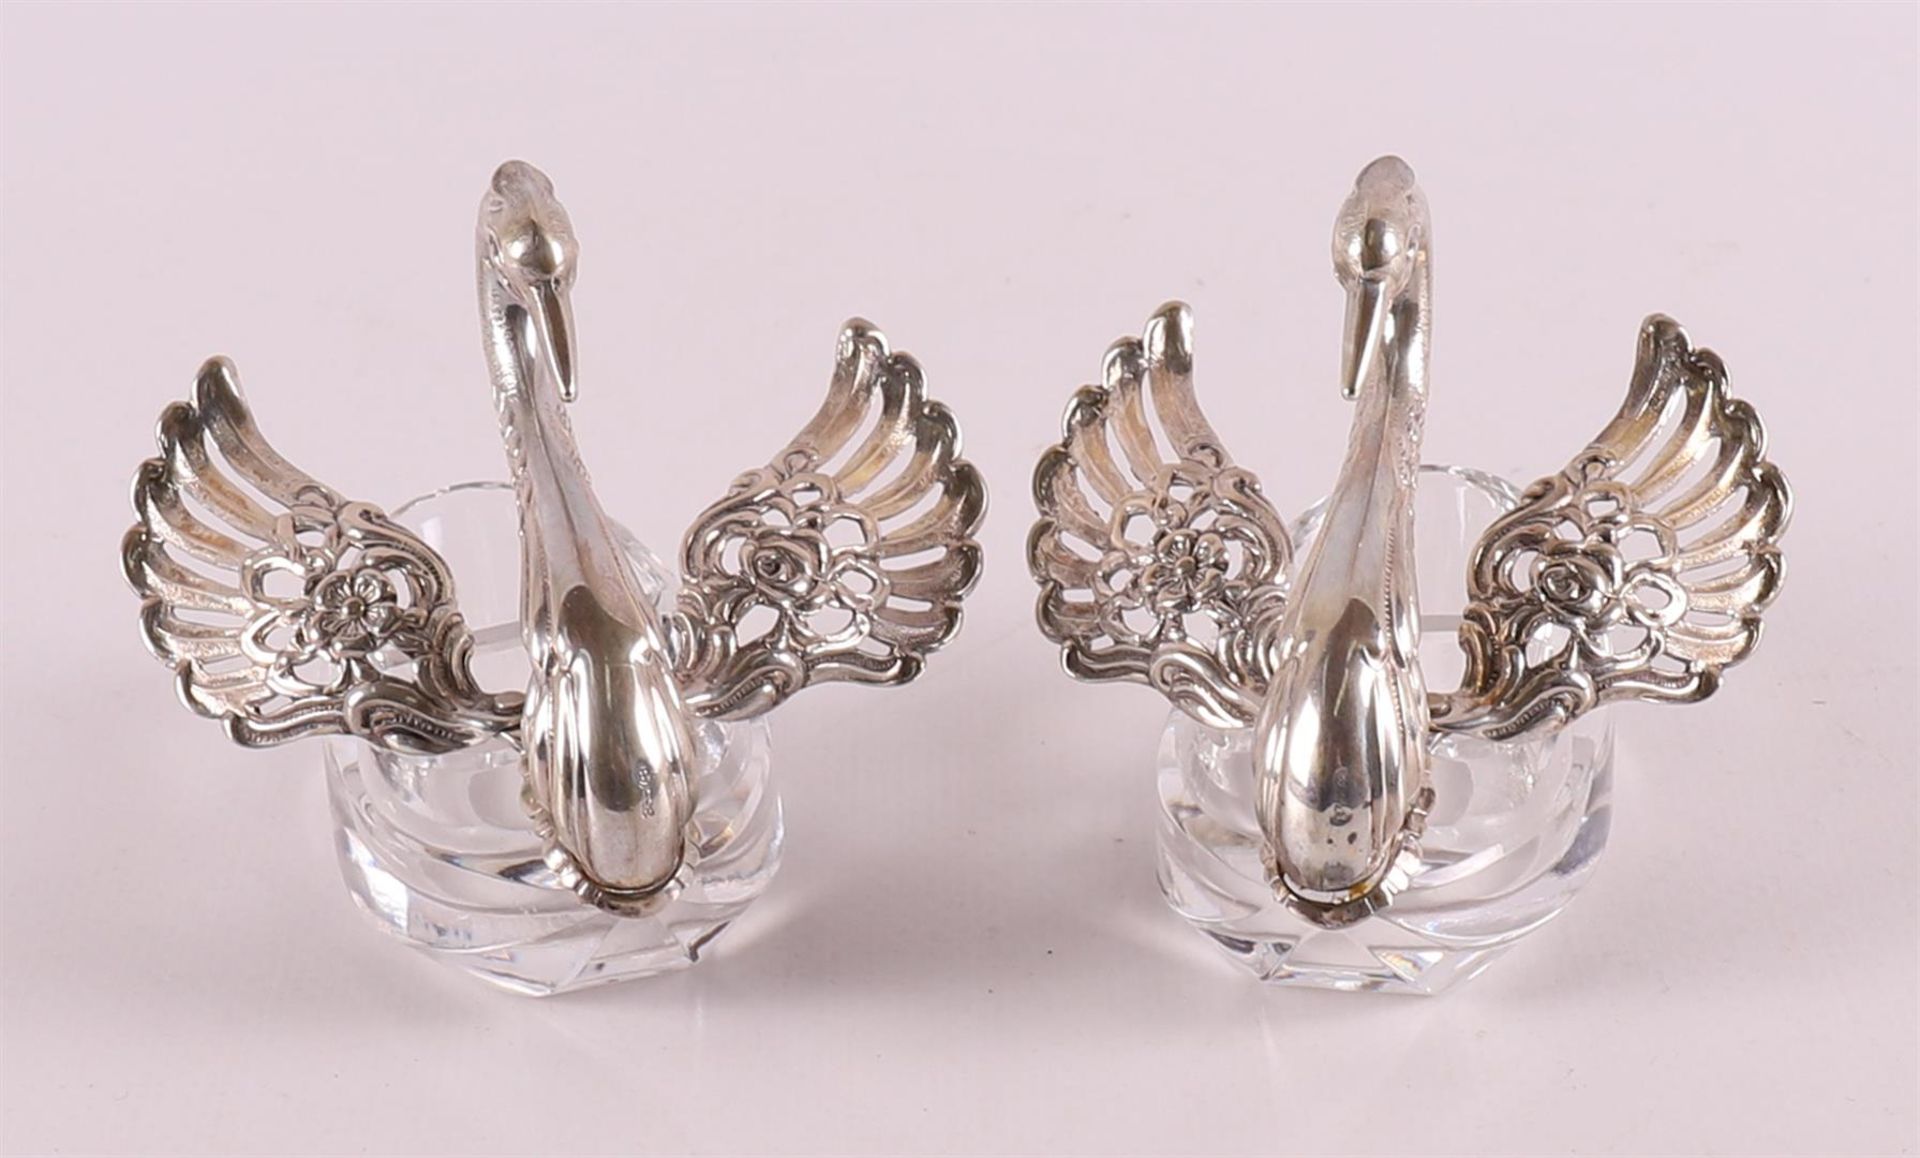 Two white and silver salt shakers in the shape of swans, 20th century. - Image 3 of 3